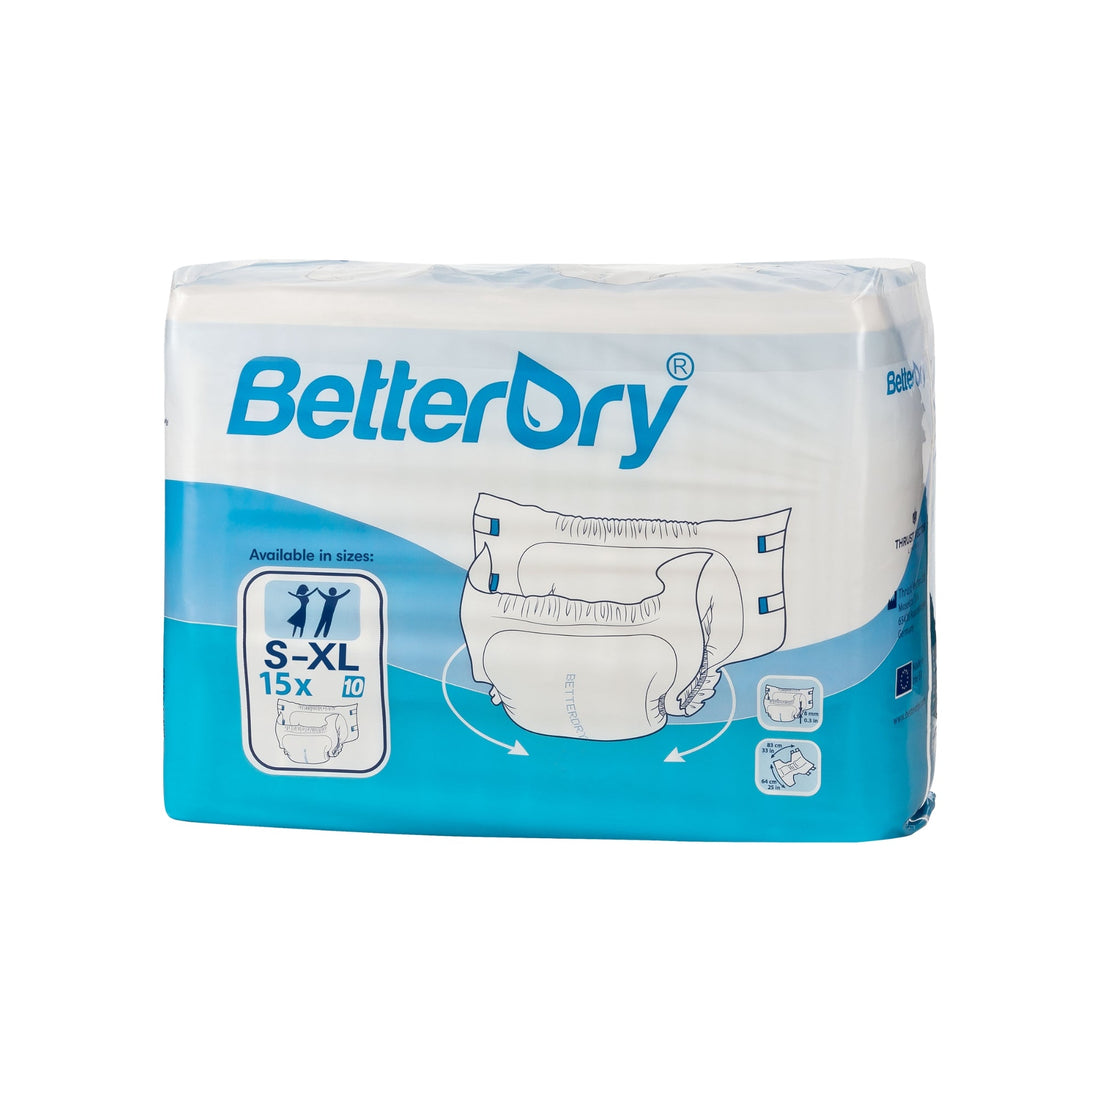 BetterDry 10 polybag from the front